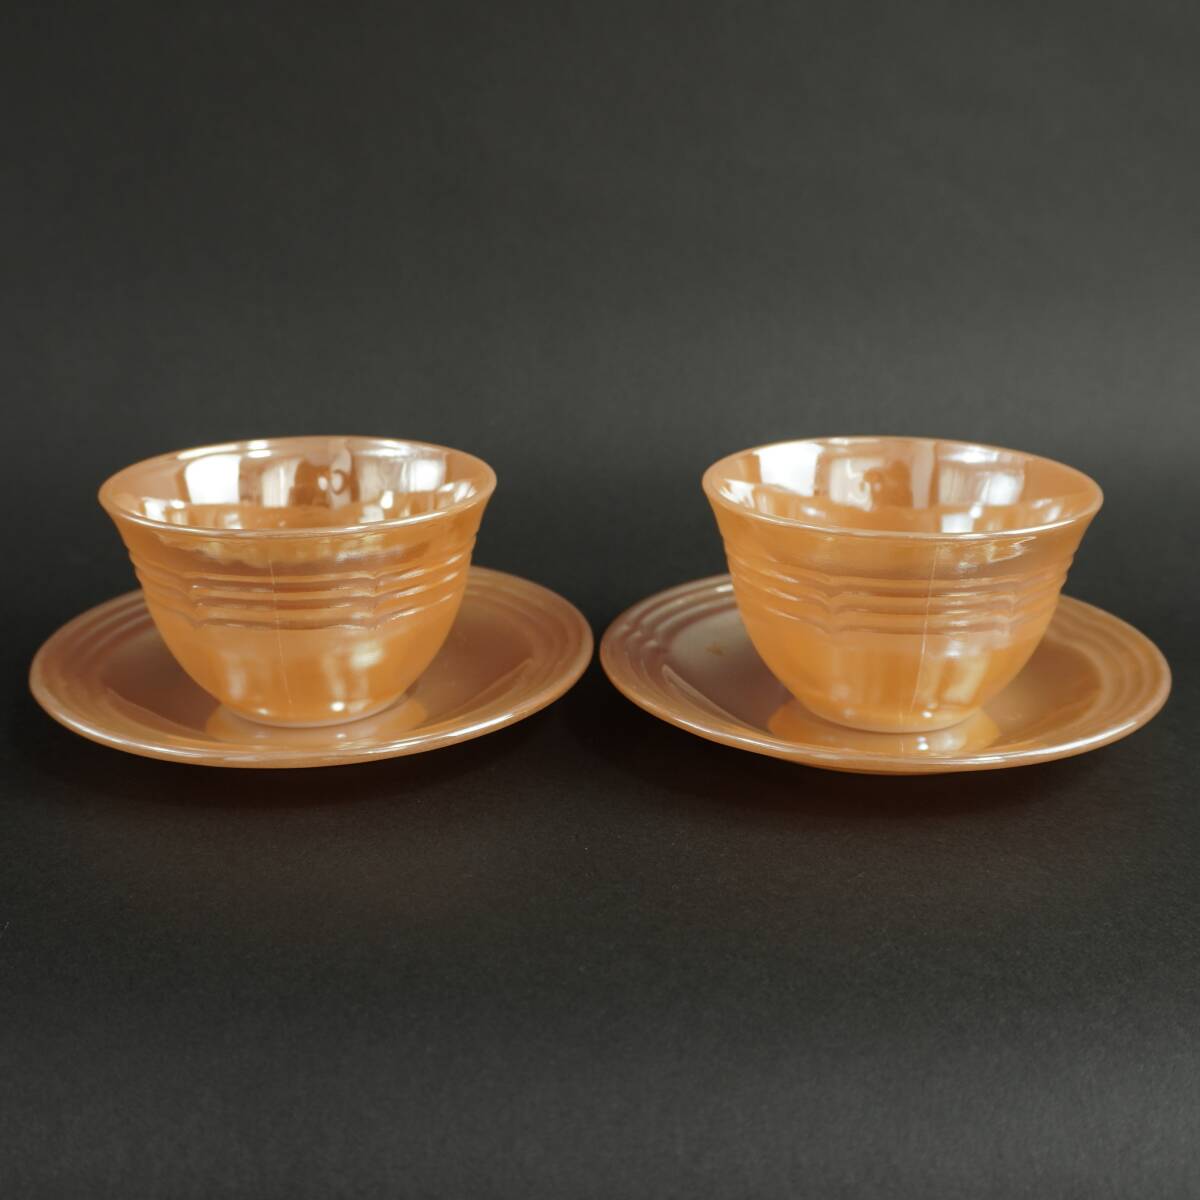 Fire King Peach Raster Cup & Saucer 2pcs Vintage ファイアーキング カップ ソーサー ティーカップ ヴィンテージ 2個セット 1960年代